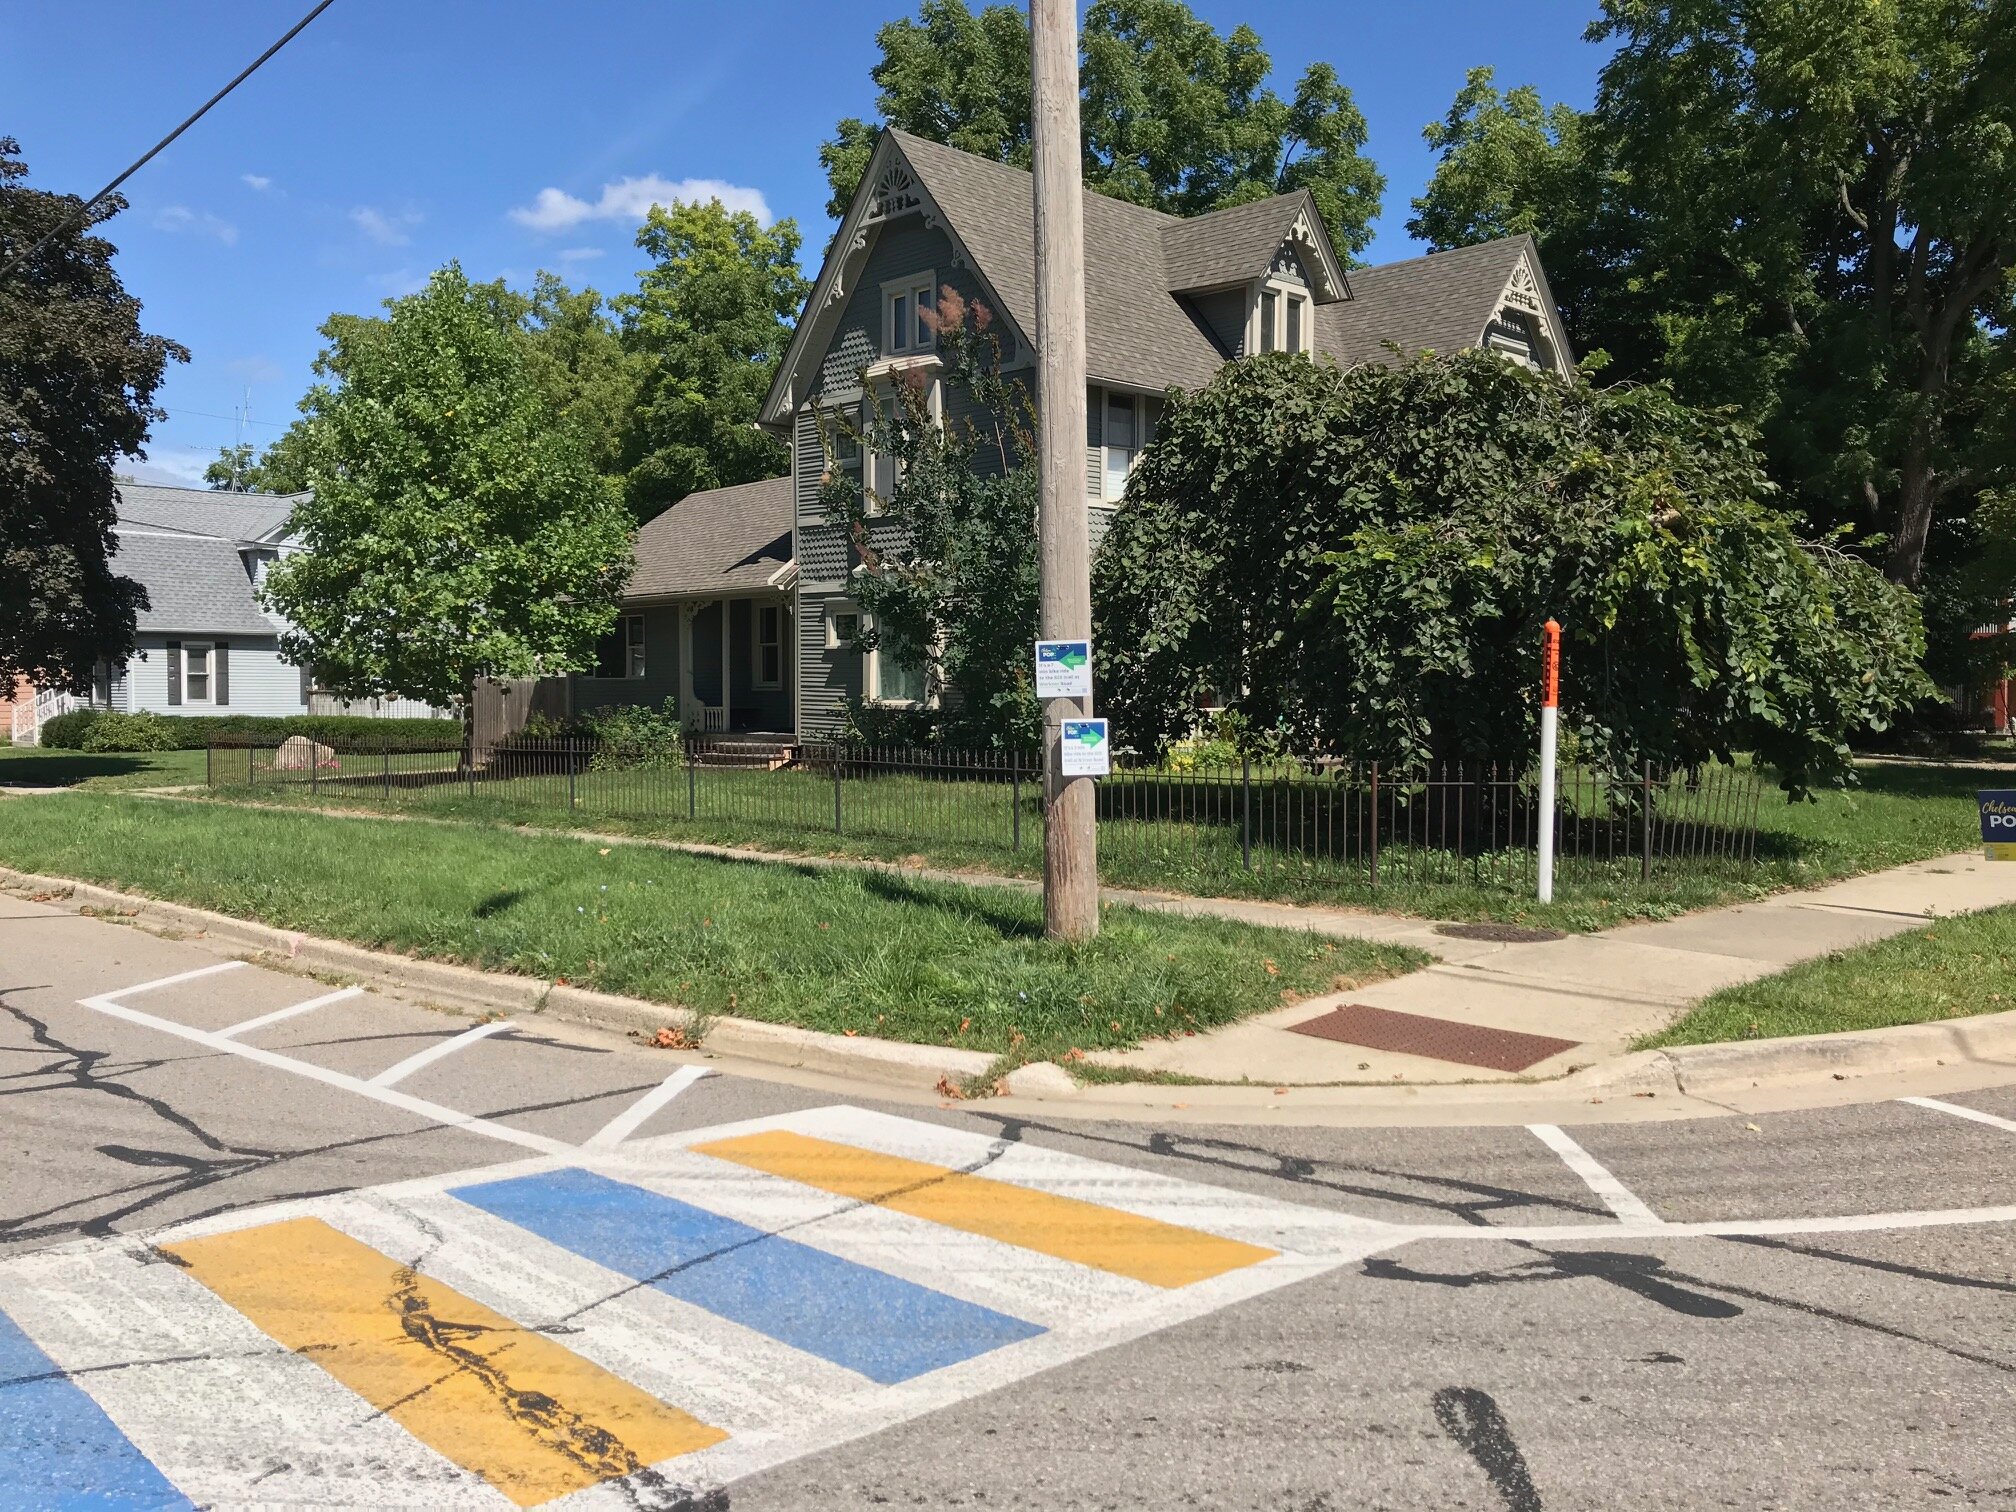  Curb extension and painted crosswalk at McKinley Street and Railroad Street. These curb extensions are meant to notify drivers they are entering a residential area and help bicyclists correctly position themselves within the roadway. 